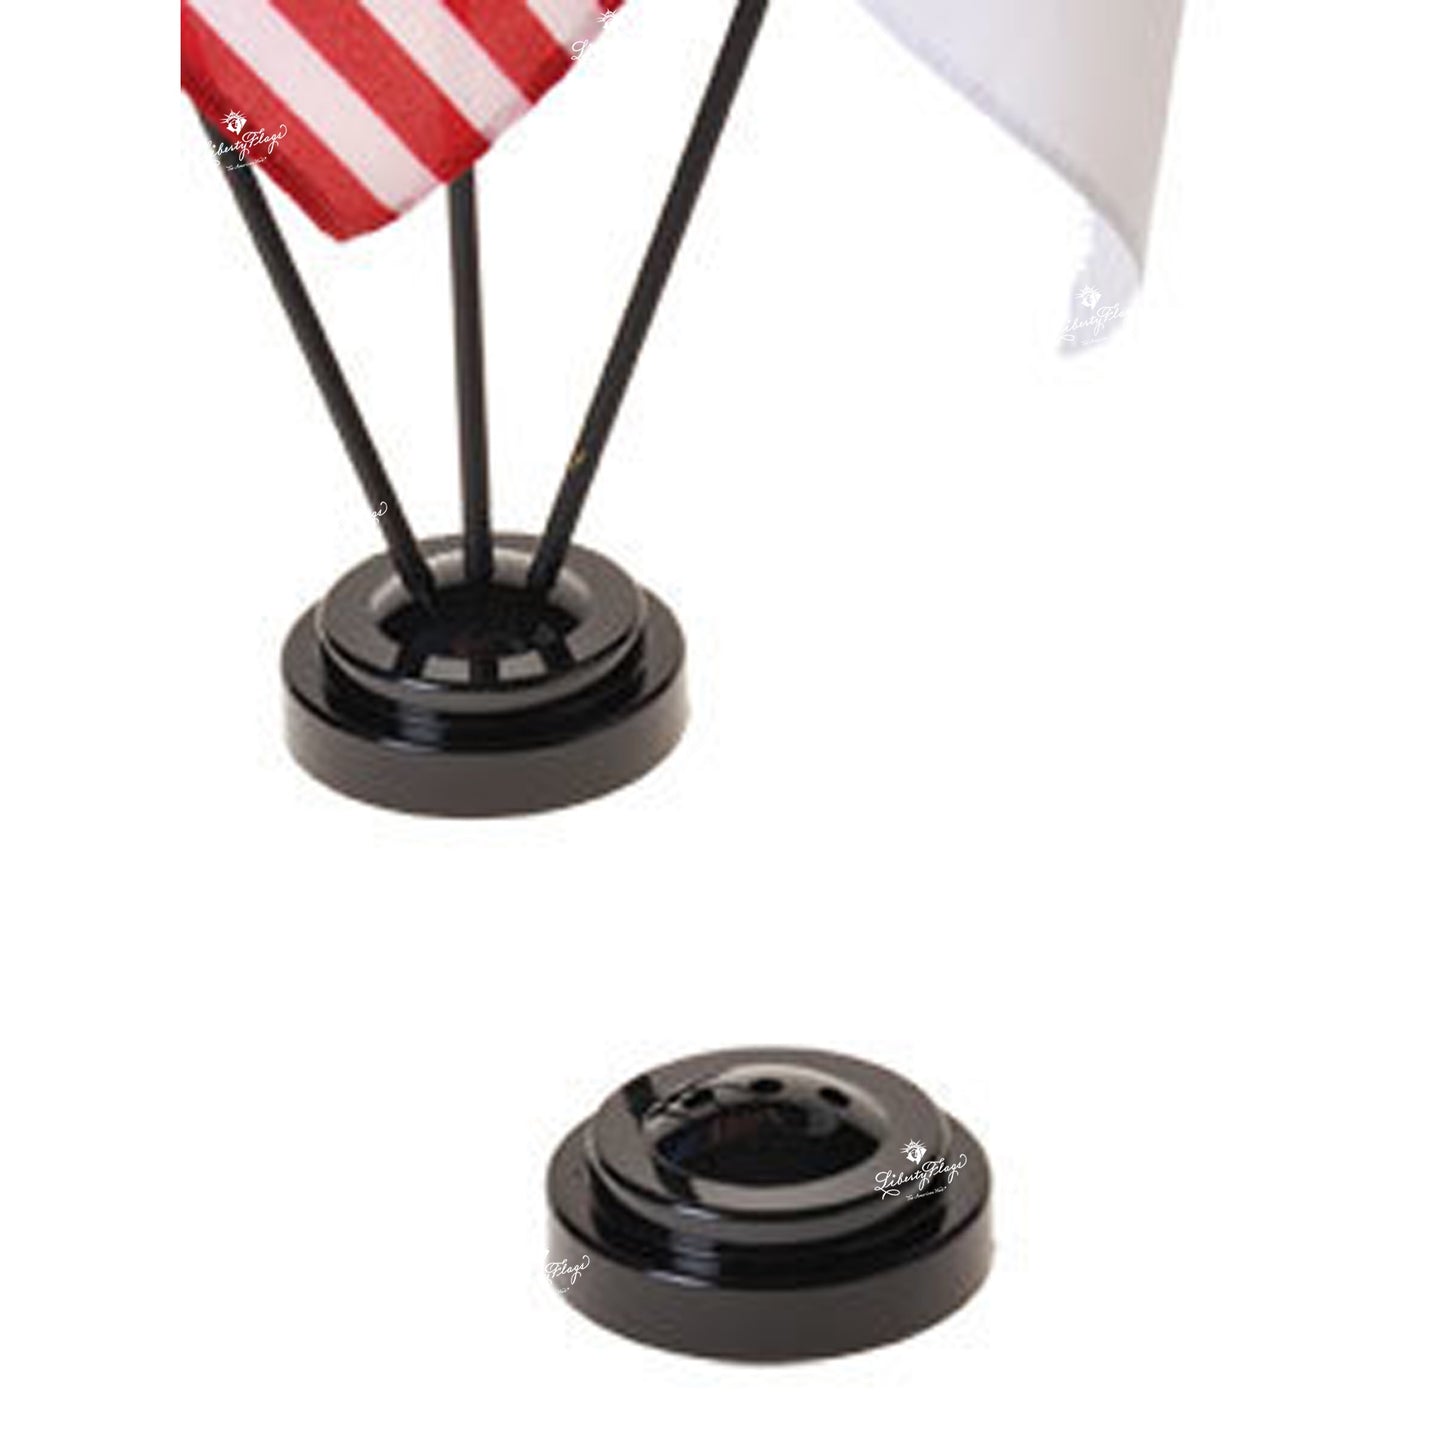 Display Bases for 4"x6" Flags - 1 to 7 Capacity